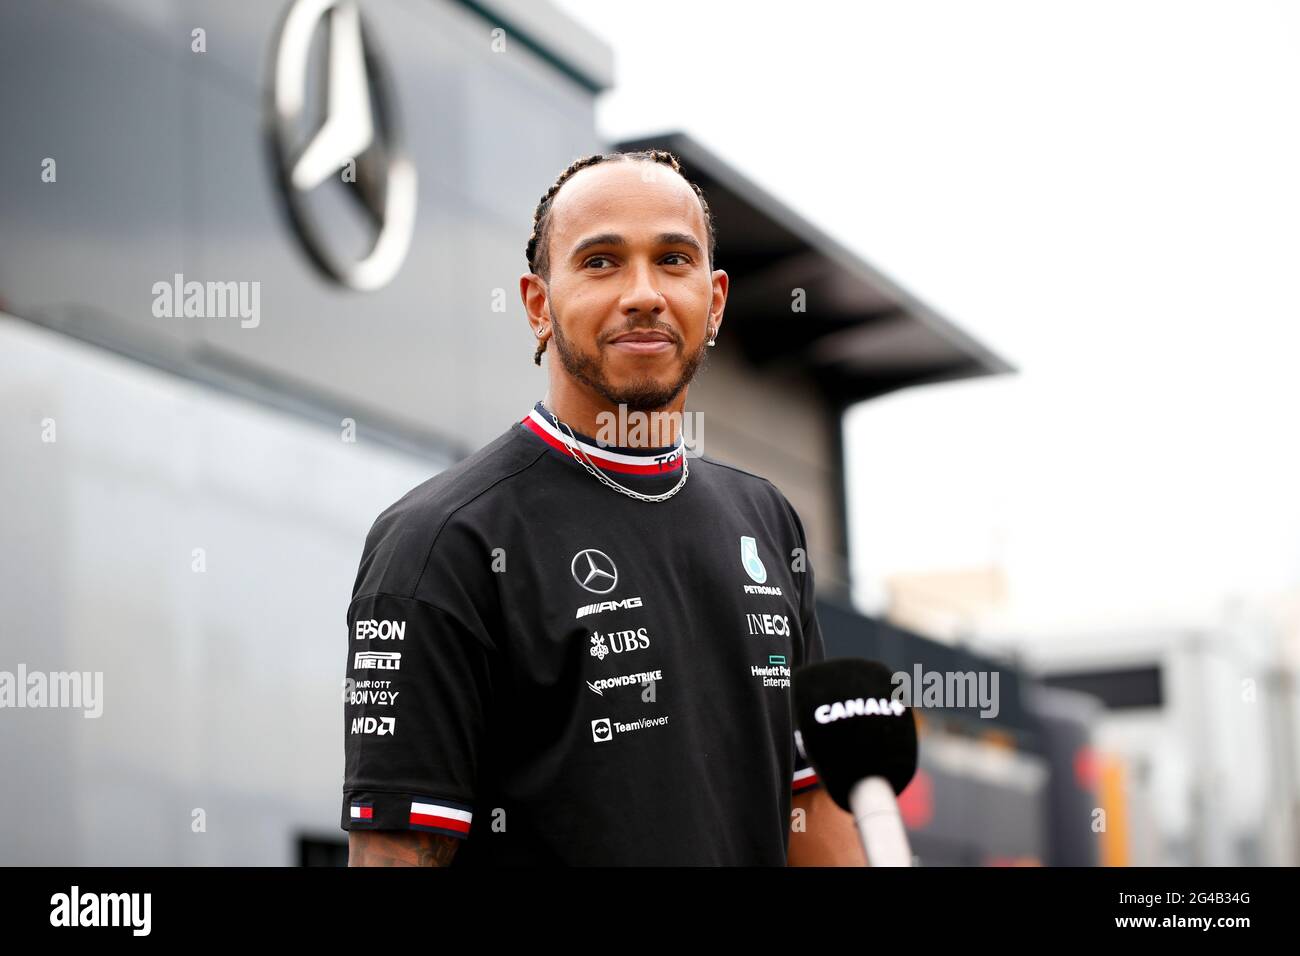 # 44 Lewis Hamilton (GBR, Mercedes-AMG Petronas F1 Team), F1 Grand Prix of France at Circuit Paul Ricard on June 17, 2021 in Le Castellet, France. (Photo by HOCH ZWEI) Stock Photo